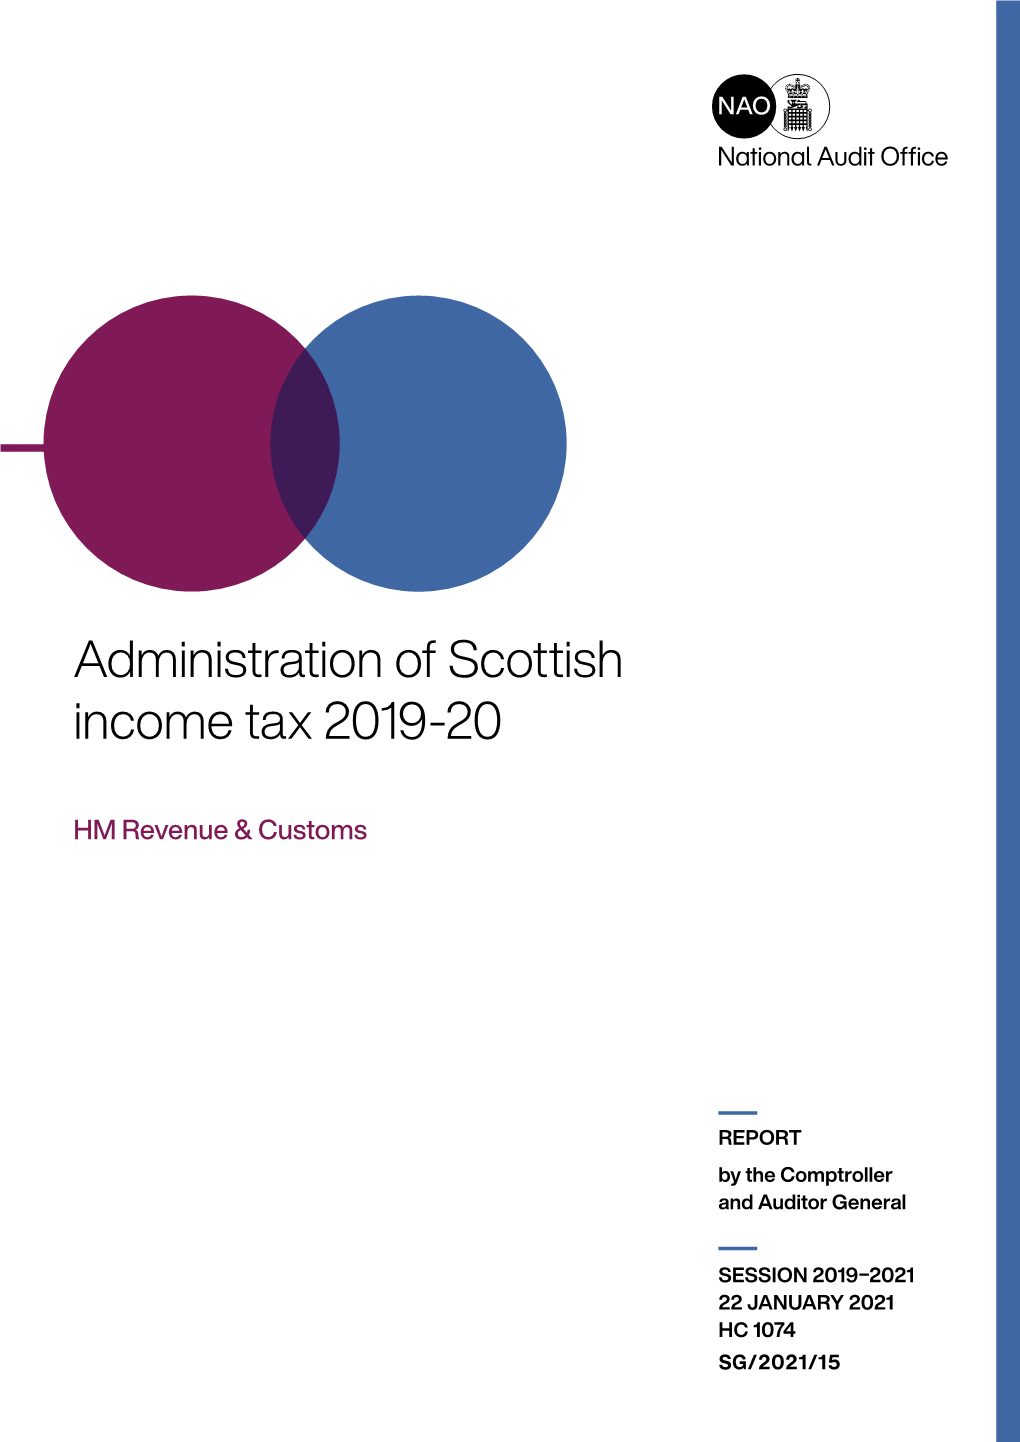 NAO's Report on the Administration of Scottish Income Tax 2019-20